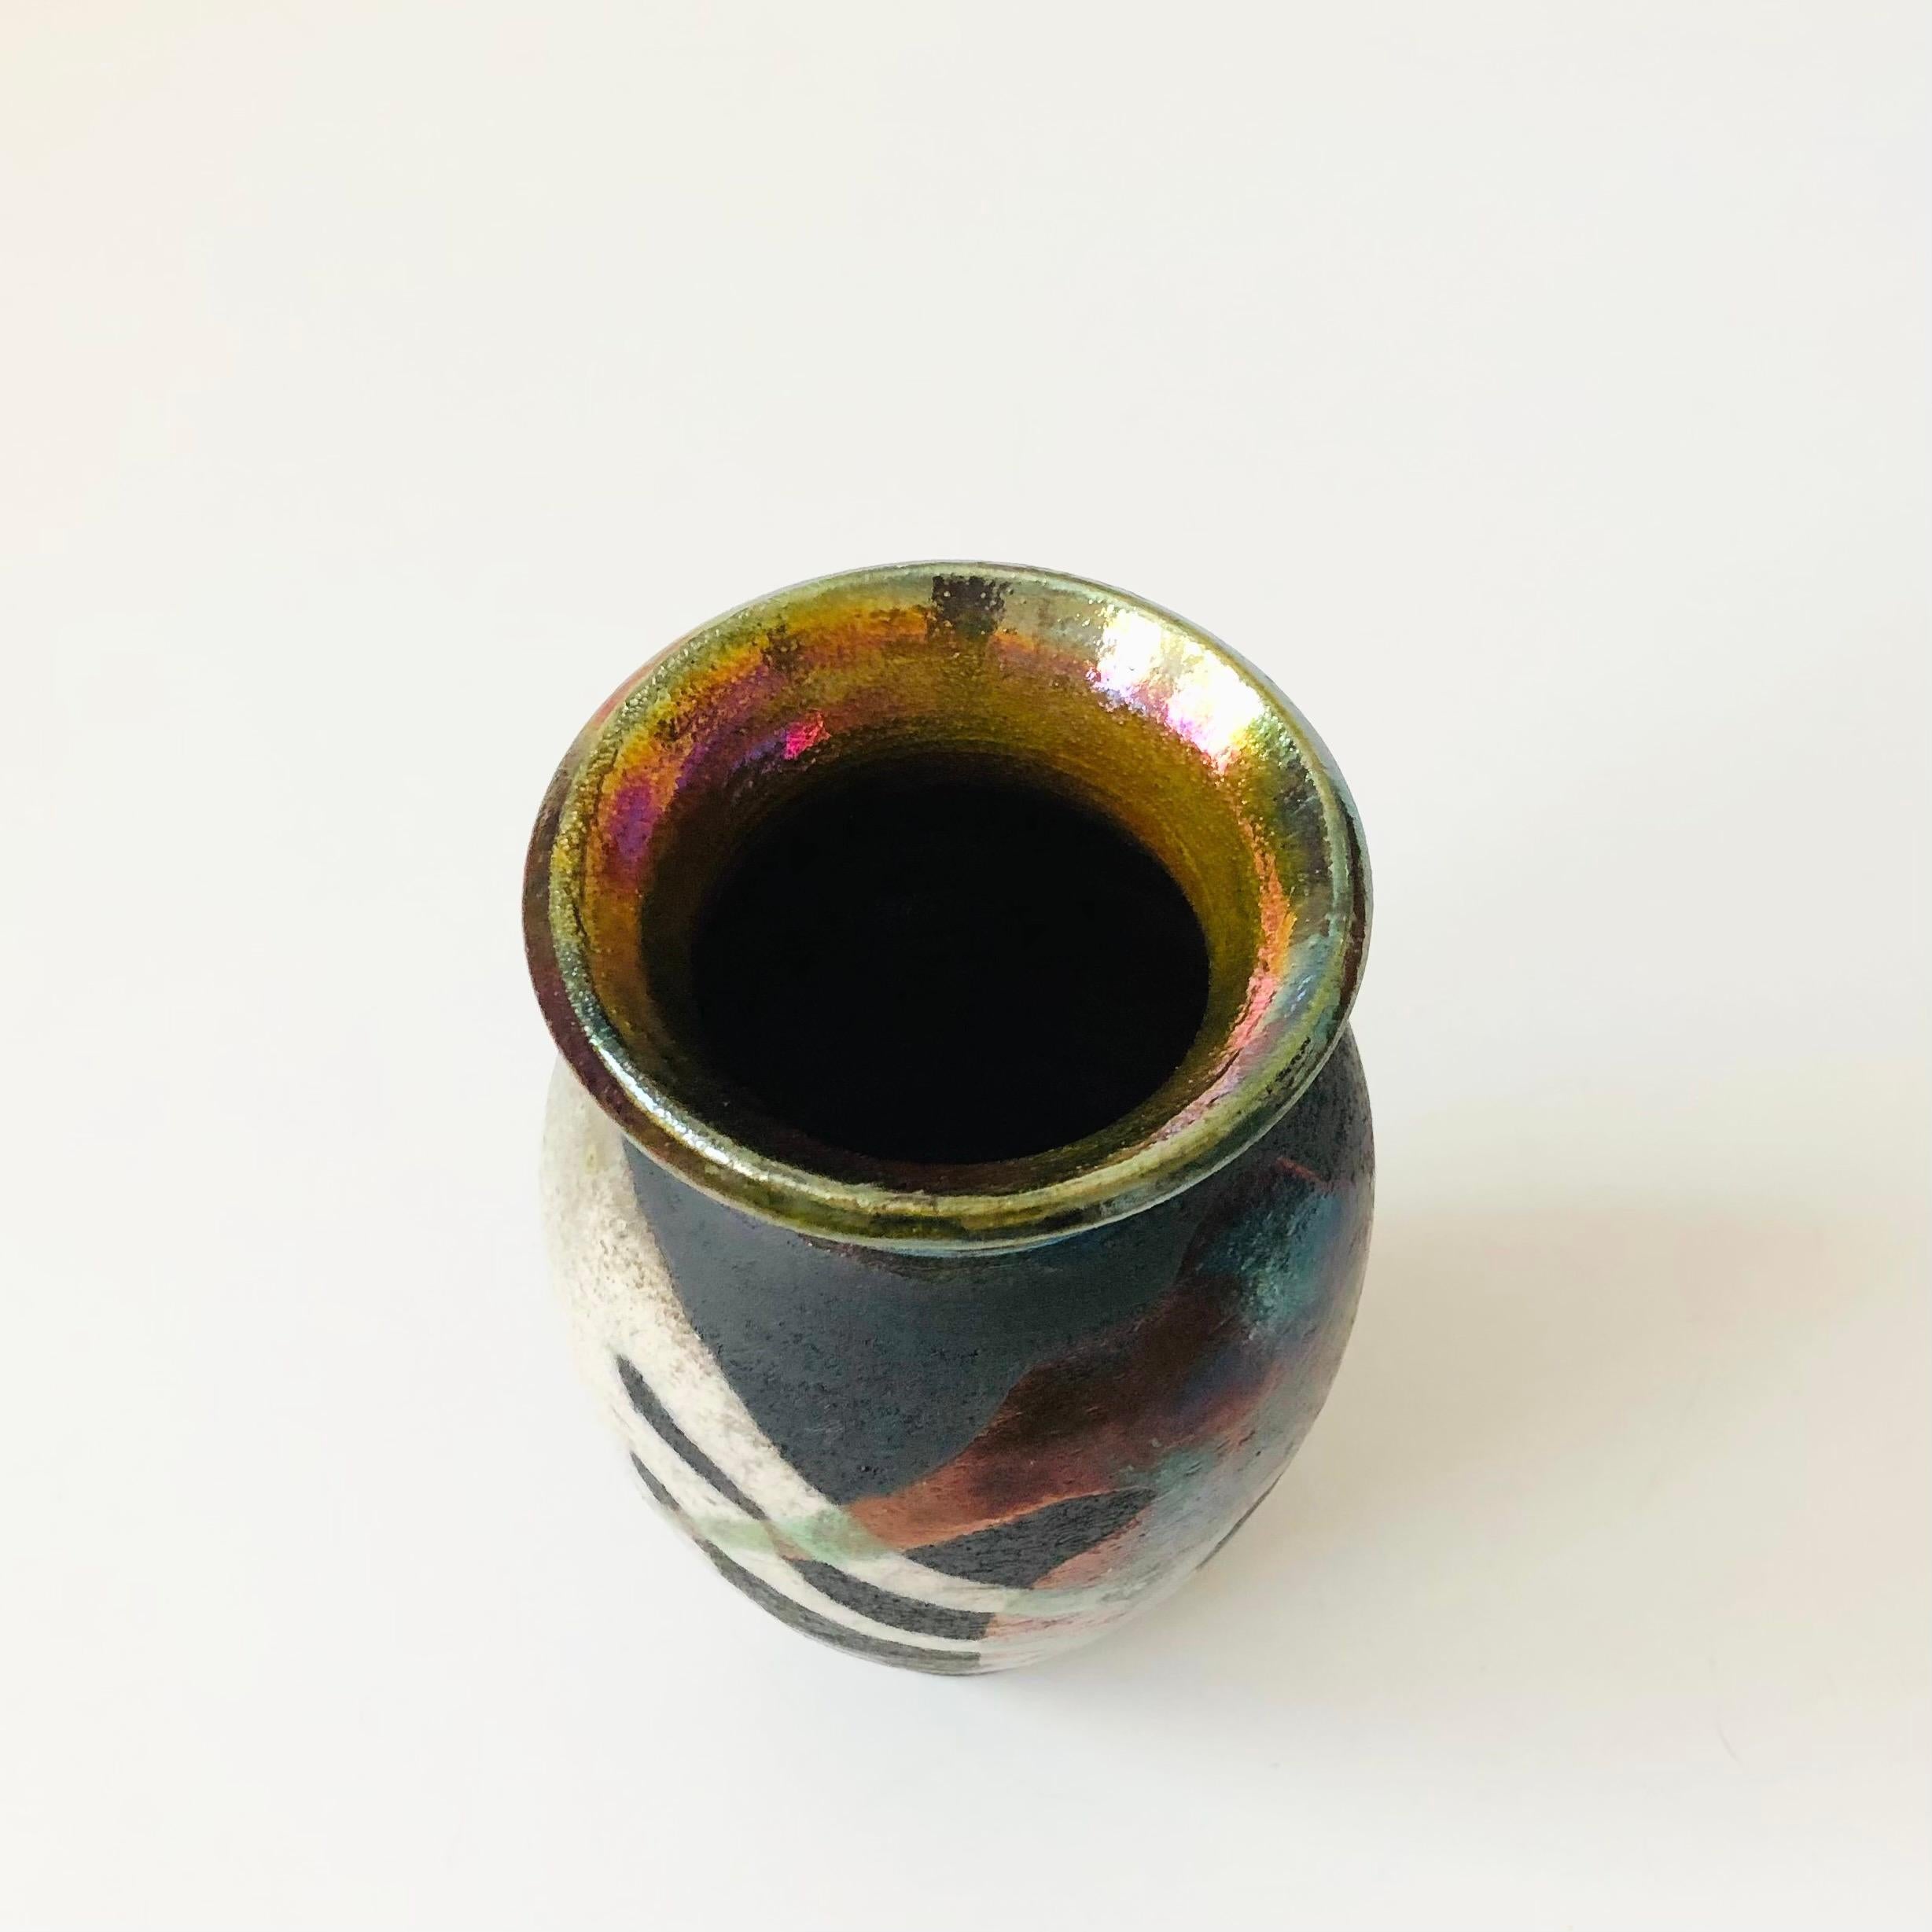 A wonderful vintage raku pottery vase. Beautiful dark base color with multicolor drip glazes in an freeform abstract pattern. Signed on the base.
